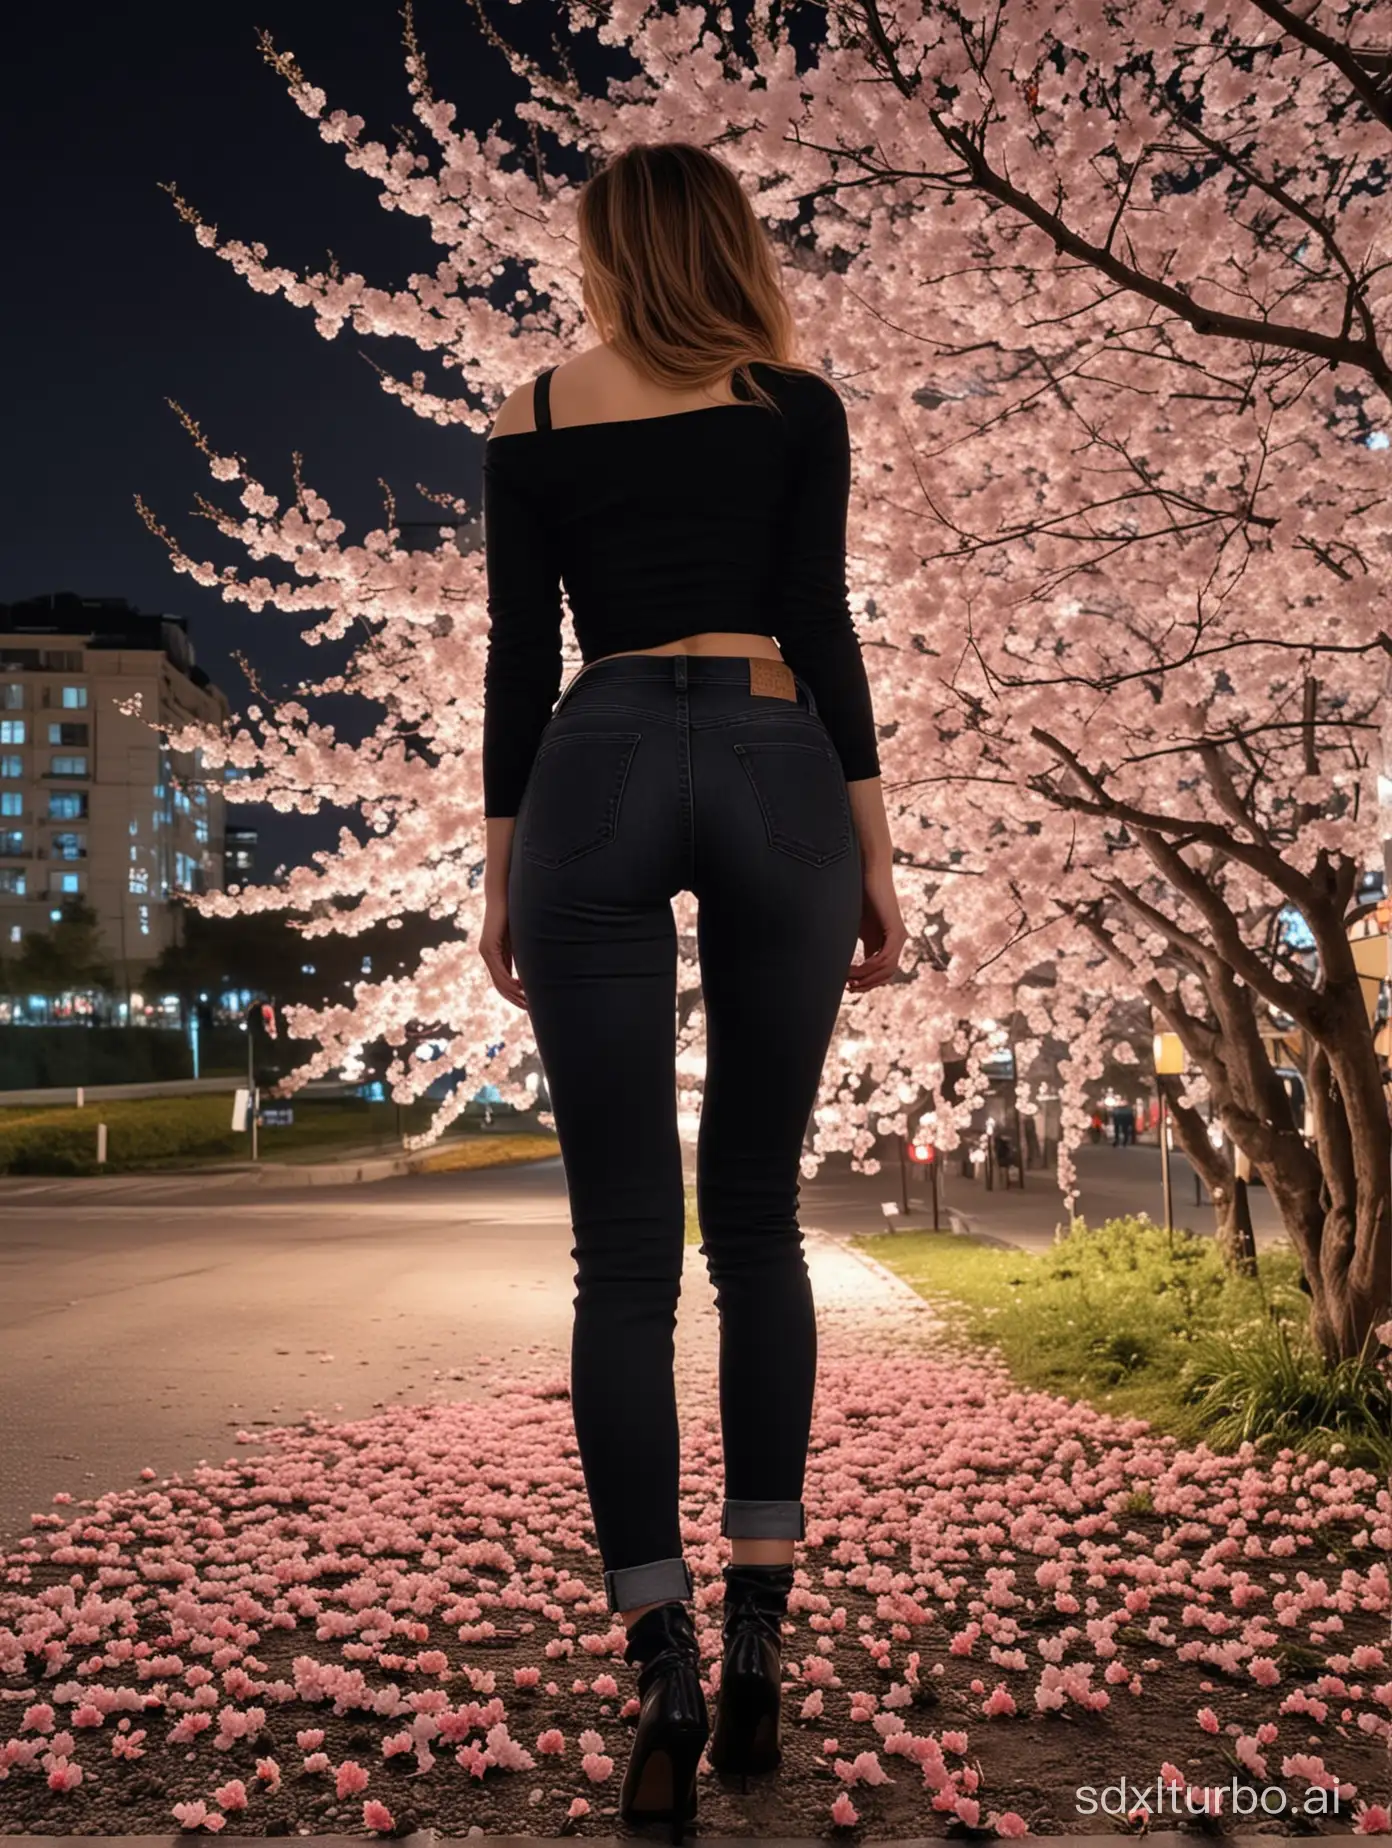 Masterpiece, top quality, super delicate, real, night cherry blossoms🌸, illumination, woman in the back in black jeans